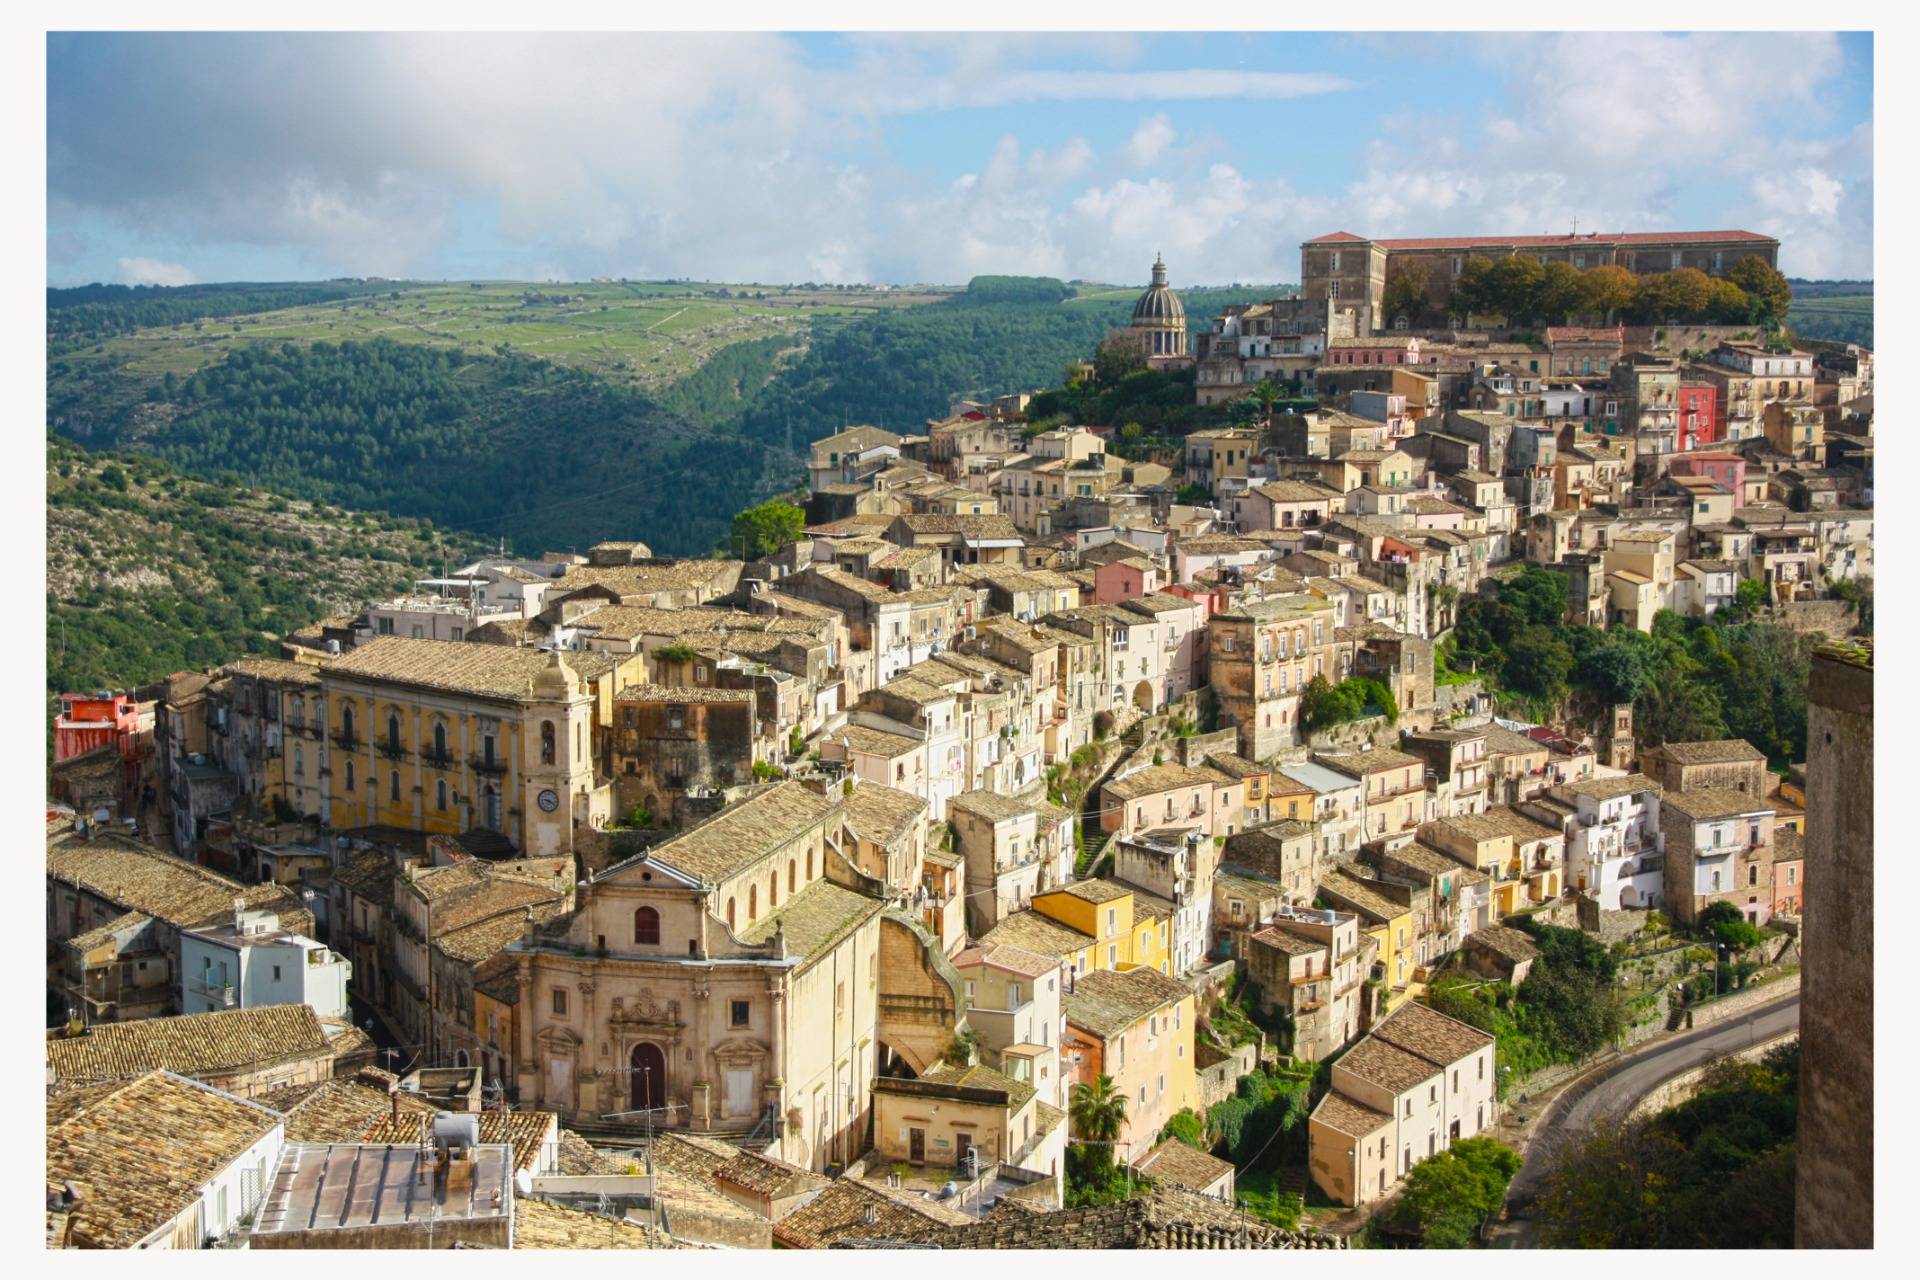 Ragusa is a great place for lovers of walking and jogging